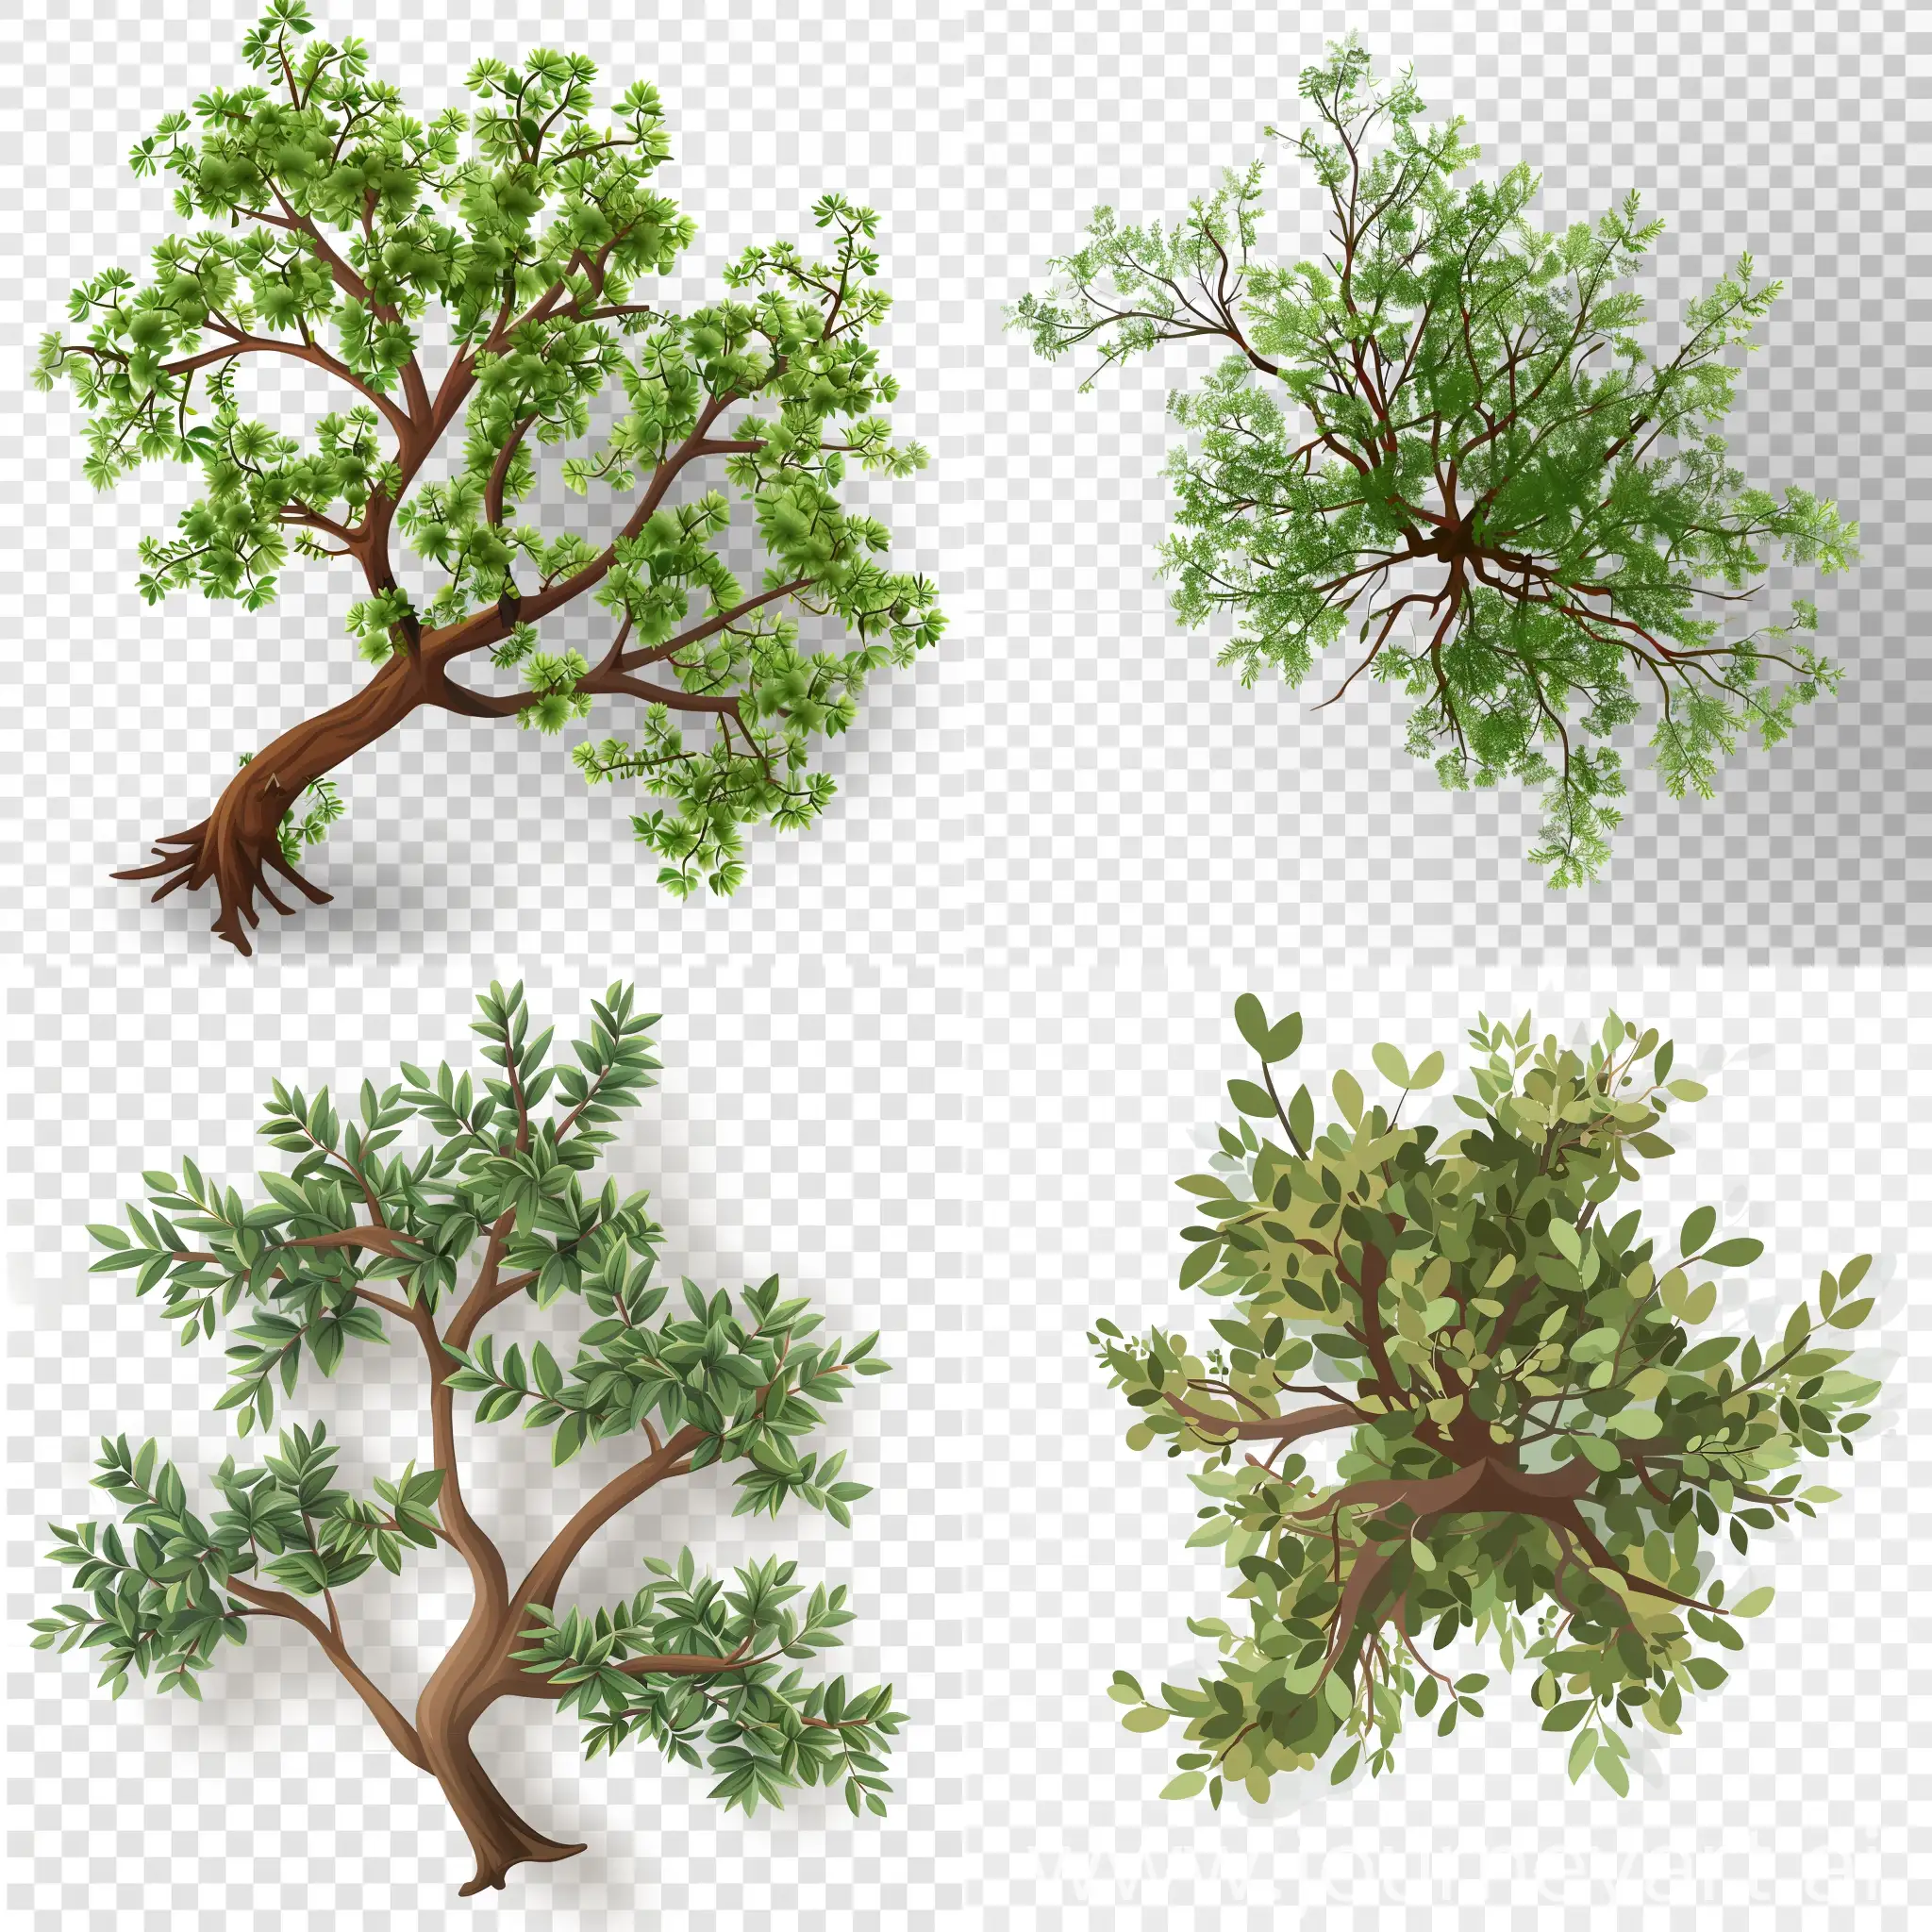 a top-down view of an acacia tree, with delicate green leaves and a brown trunk, in a cartoon style, on a transparent background.